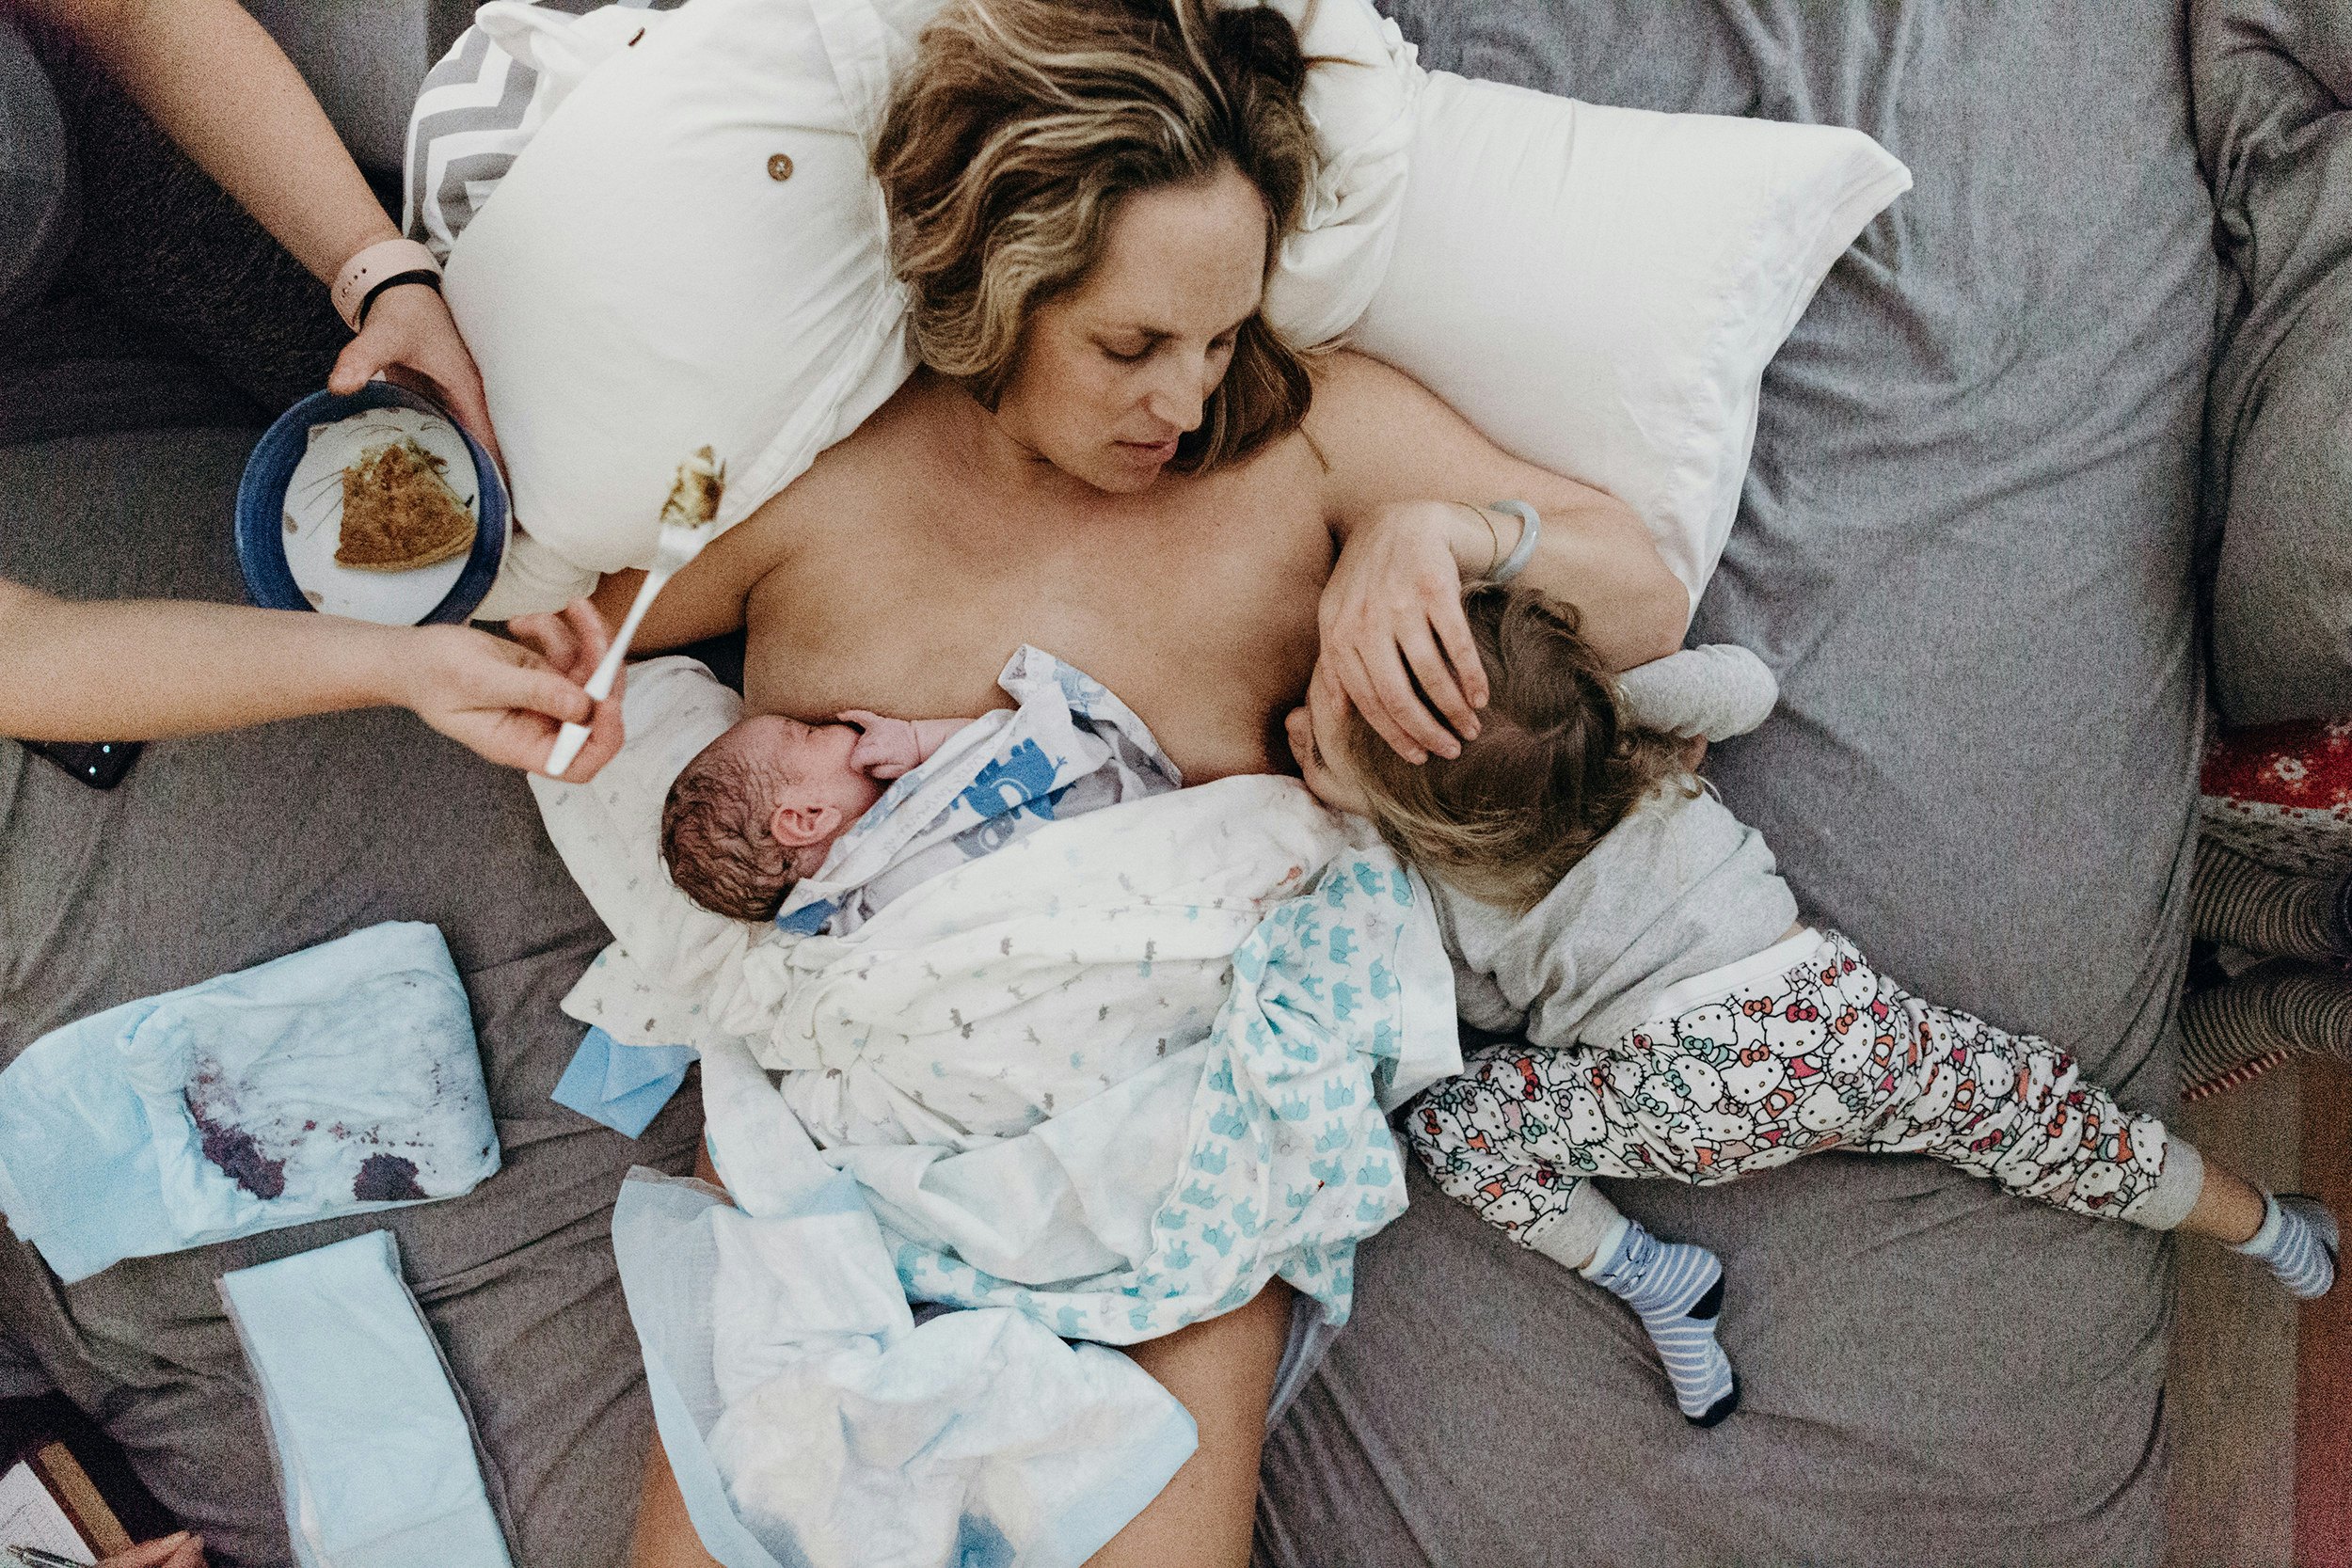 11 Beautiful Images of Moms Nursing 2 Kids at Once (PHOTOS)